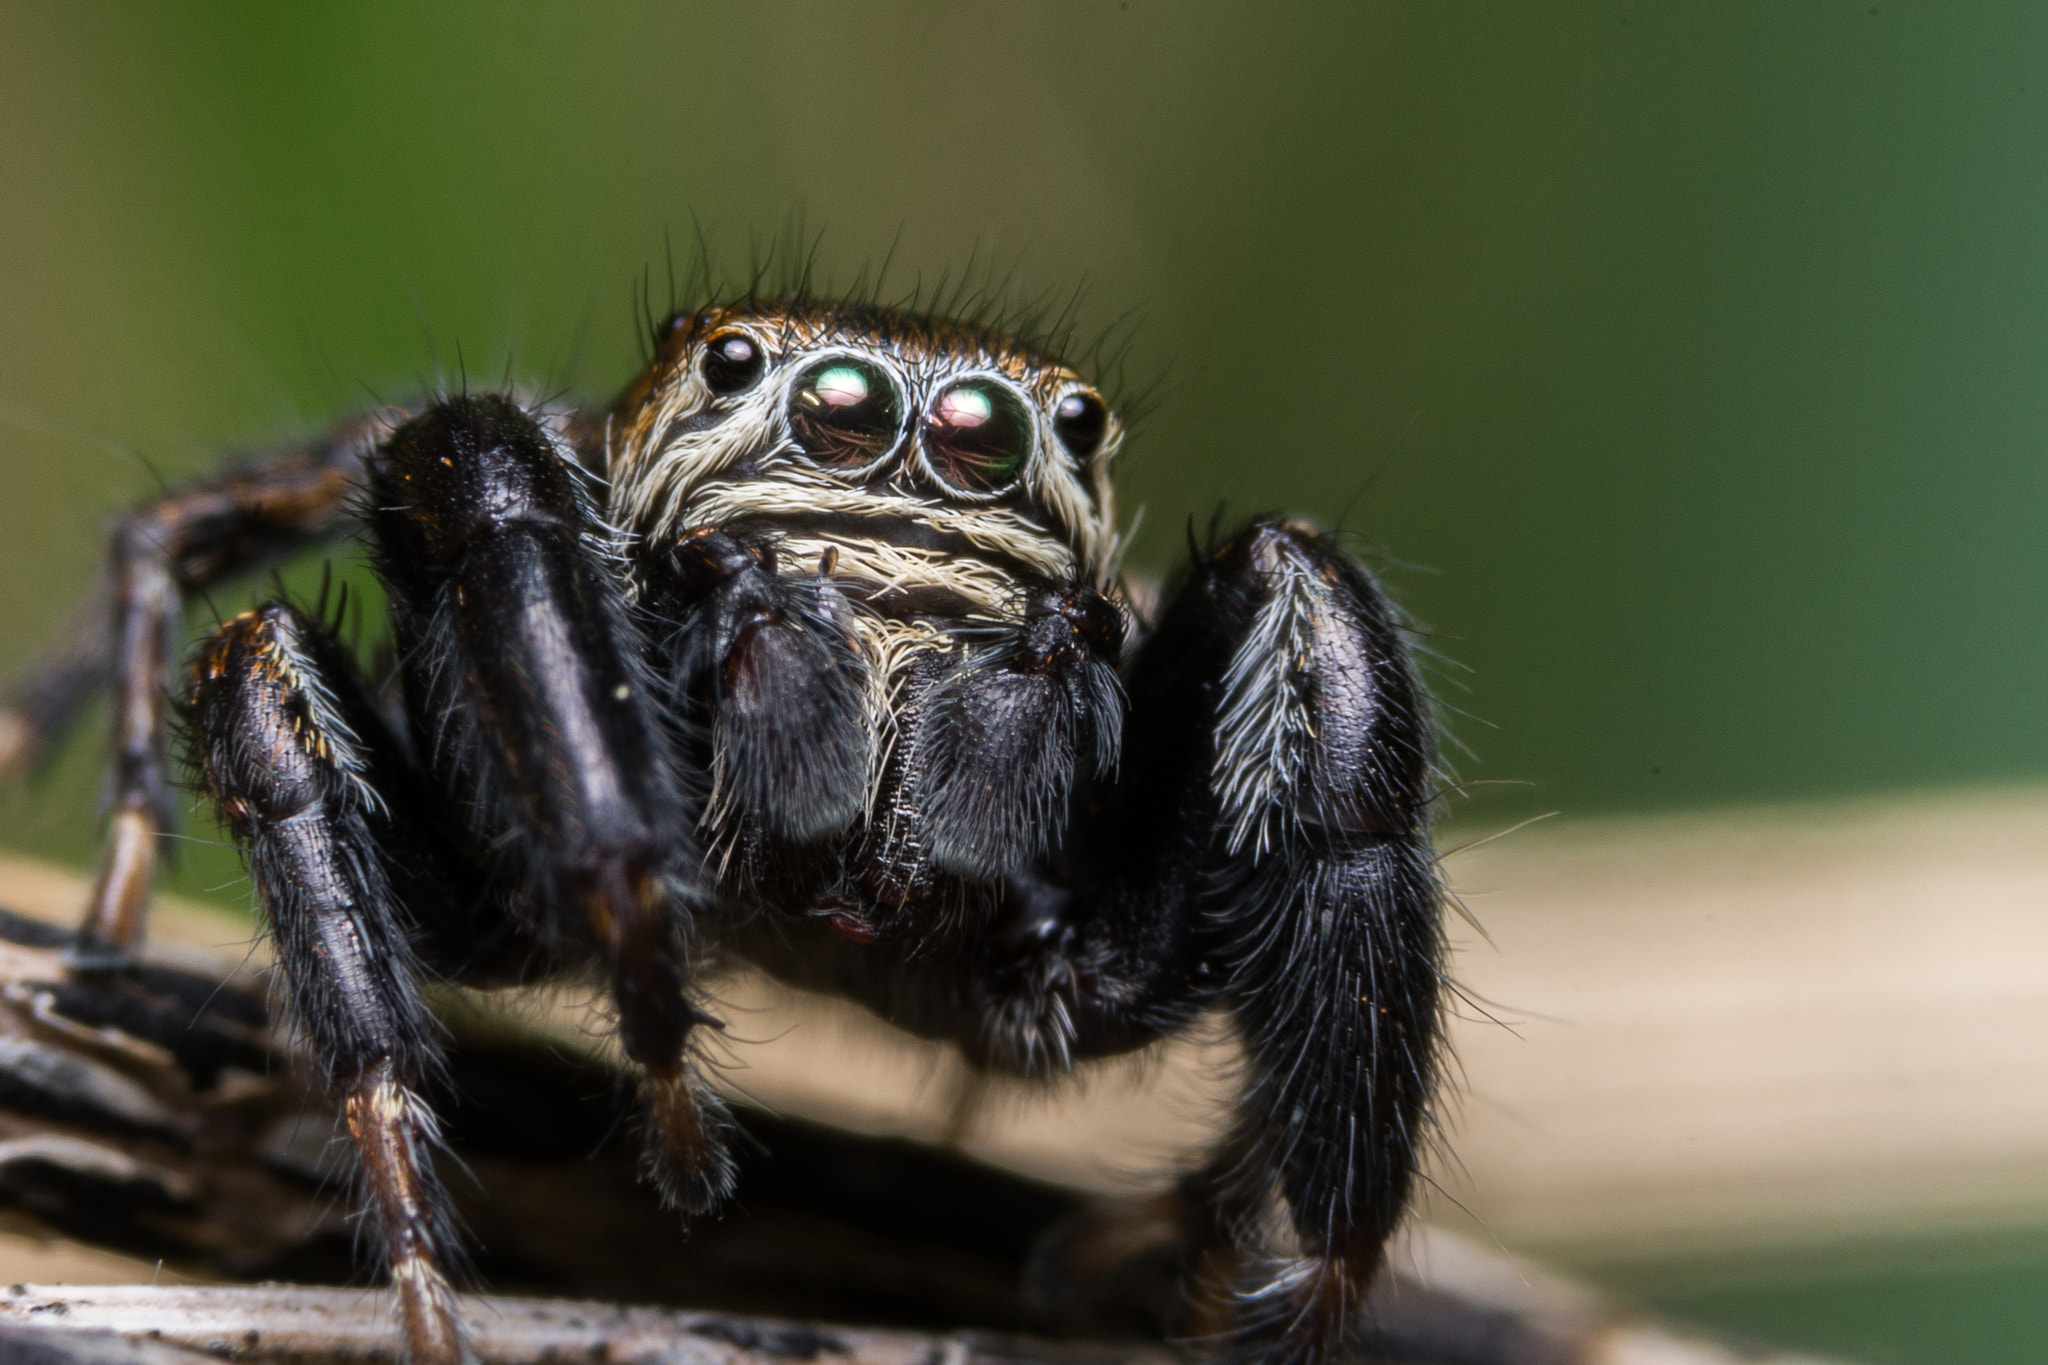 Sony a99 II sample photo. Jumping spider photography